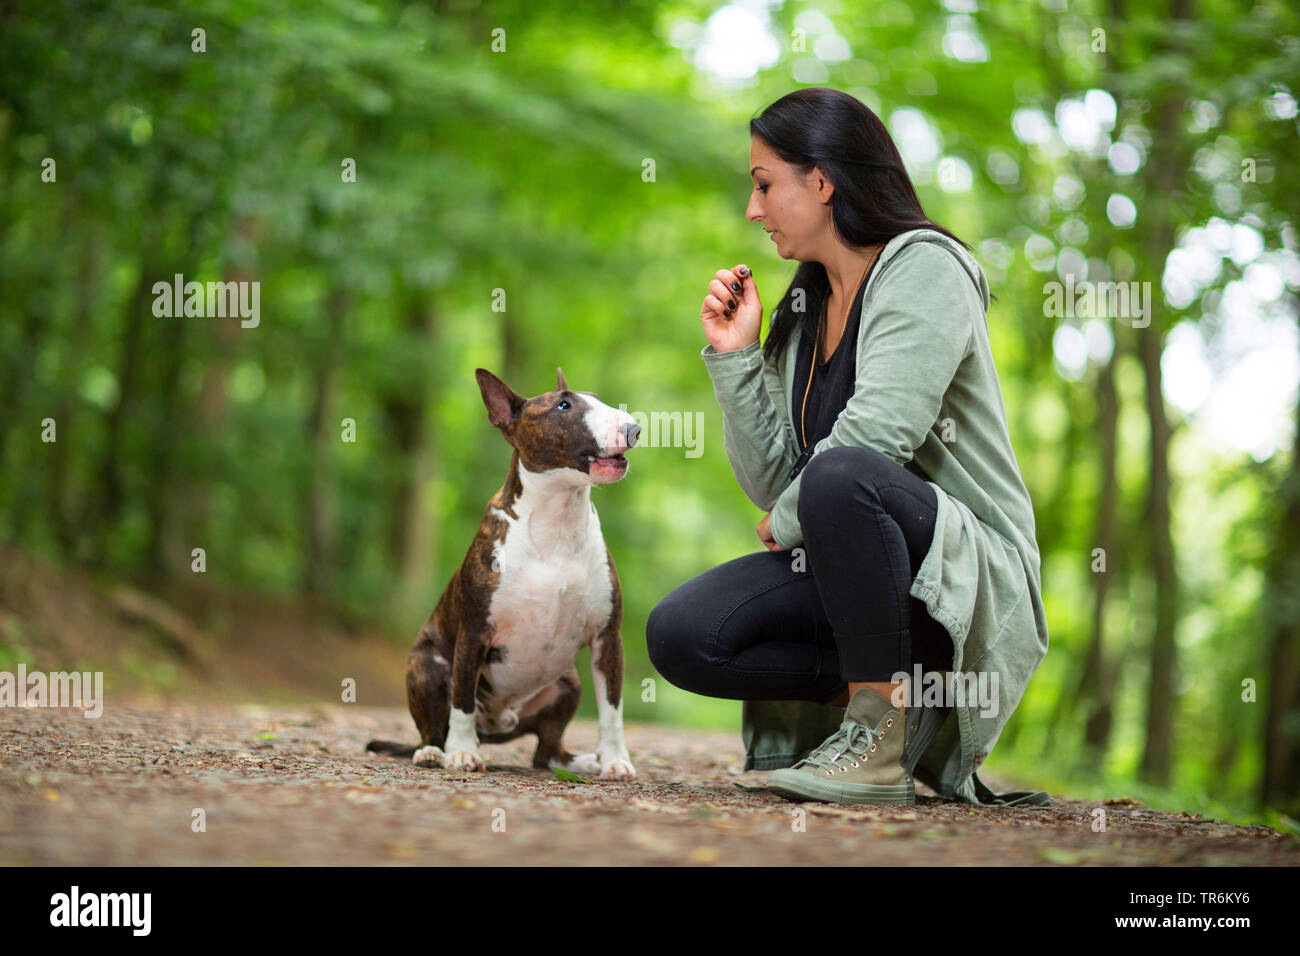 Bull Terrier (Canis lupus f. familiaris), male dog sitting on a forest path and idolizing his mistress, Germany Stock Photo